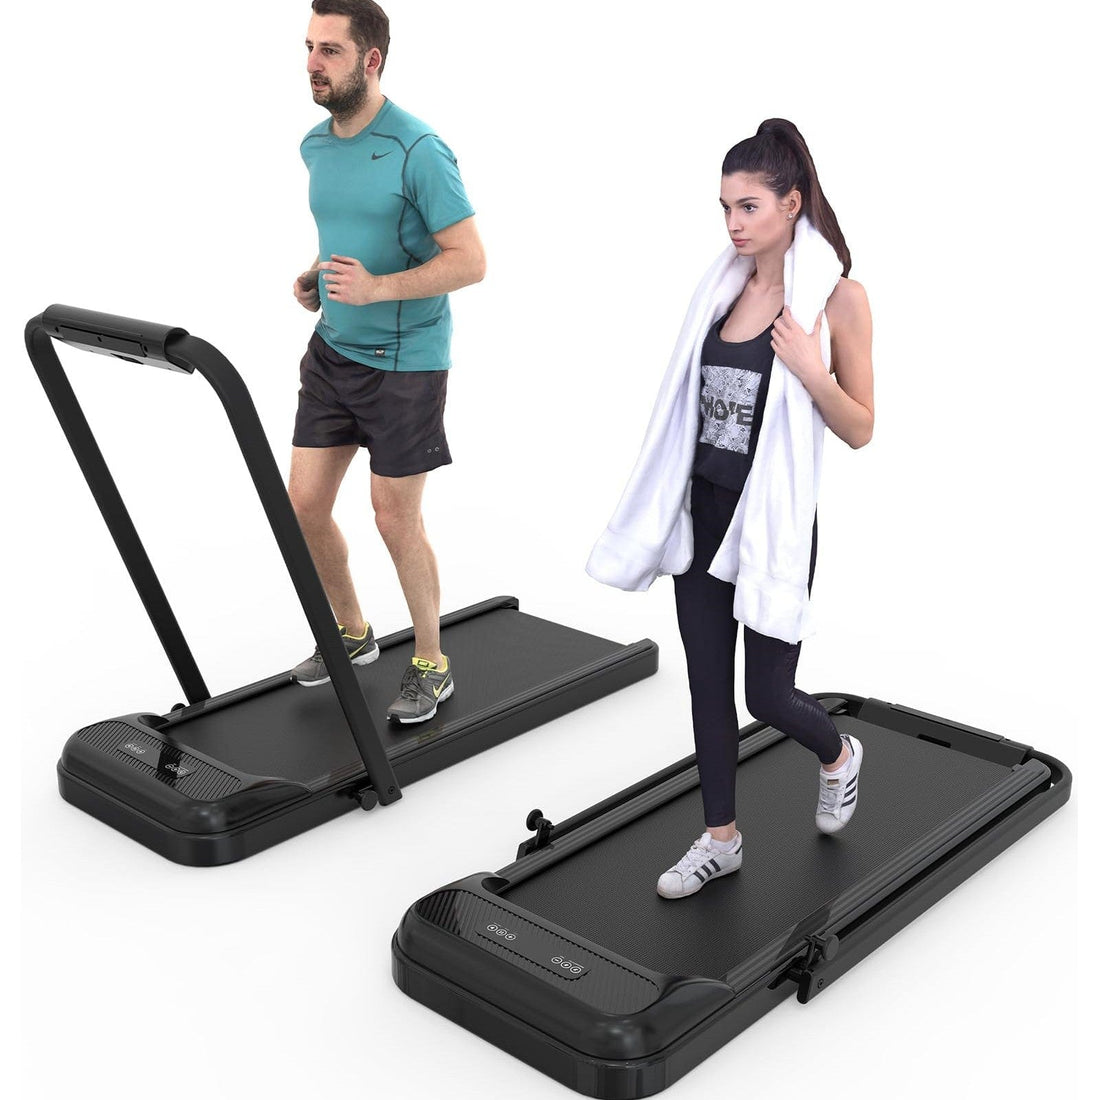 2-in-1 Treadmill 2.25 HP 0.6-6.2 MPH for Running Walking Folding Treadmill With Real-time Workout Data on LCD Display